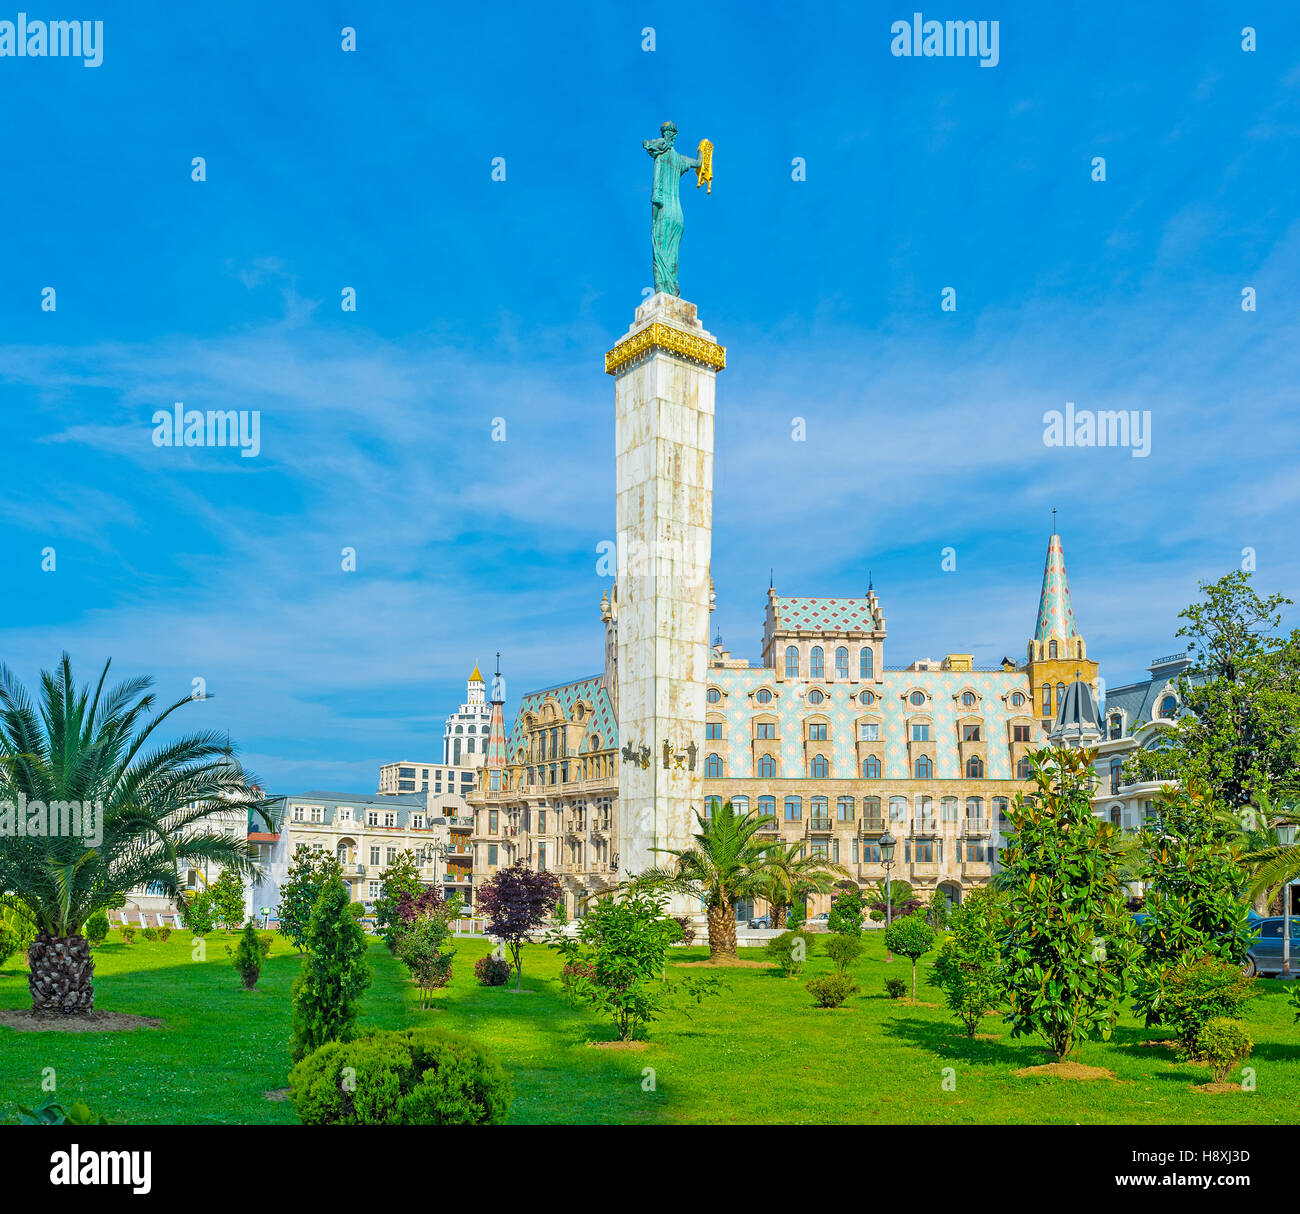 The bronze statue of Medea with the golden fleece rises over the mansions and greenery of Europe Square, Batumi, Georgia. Stock Photo